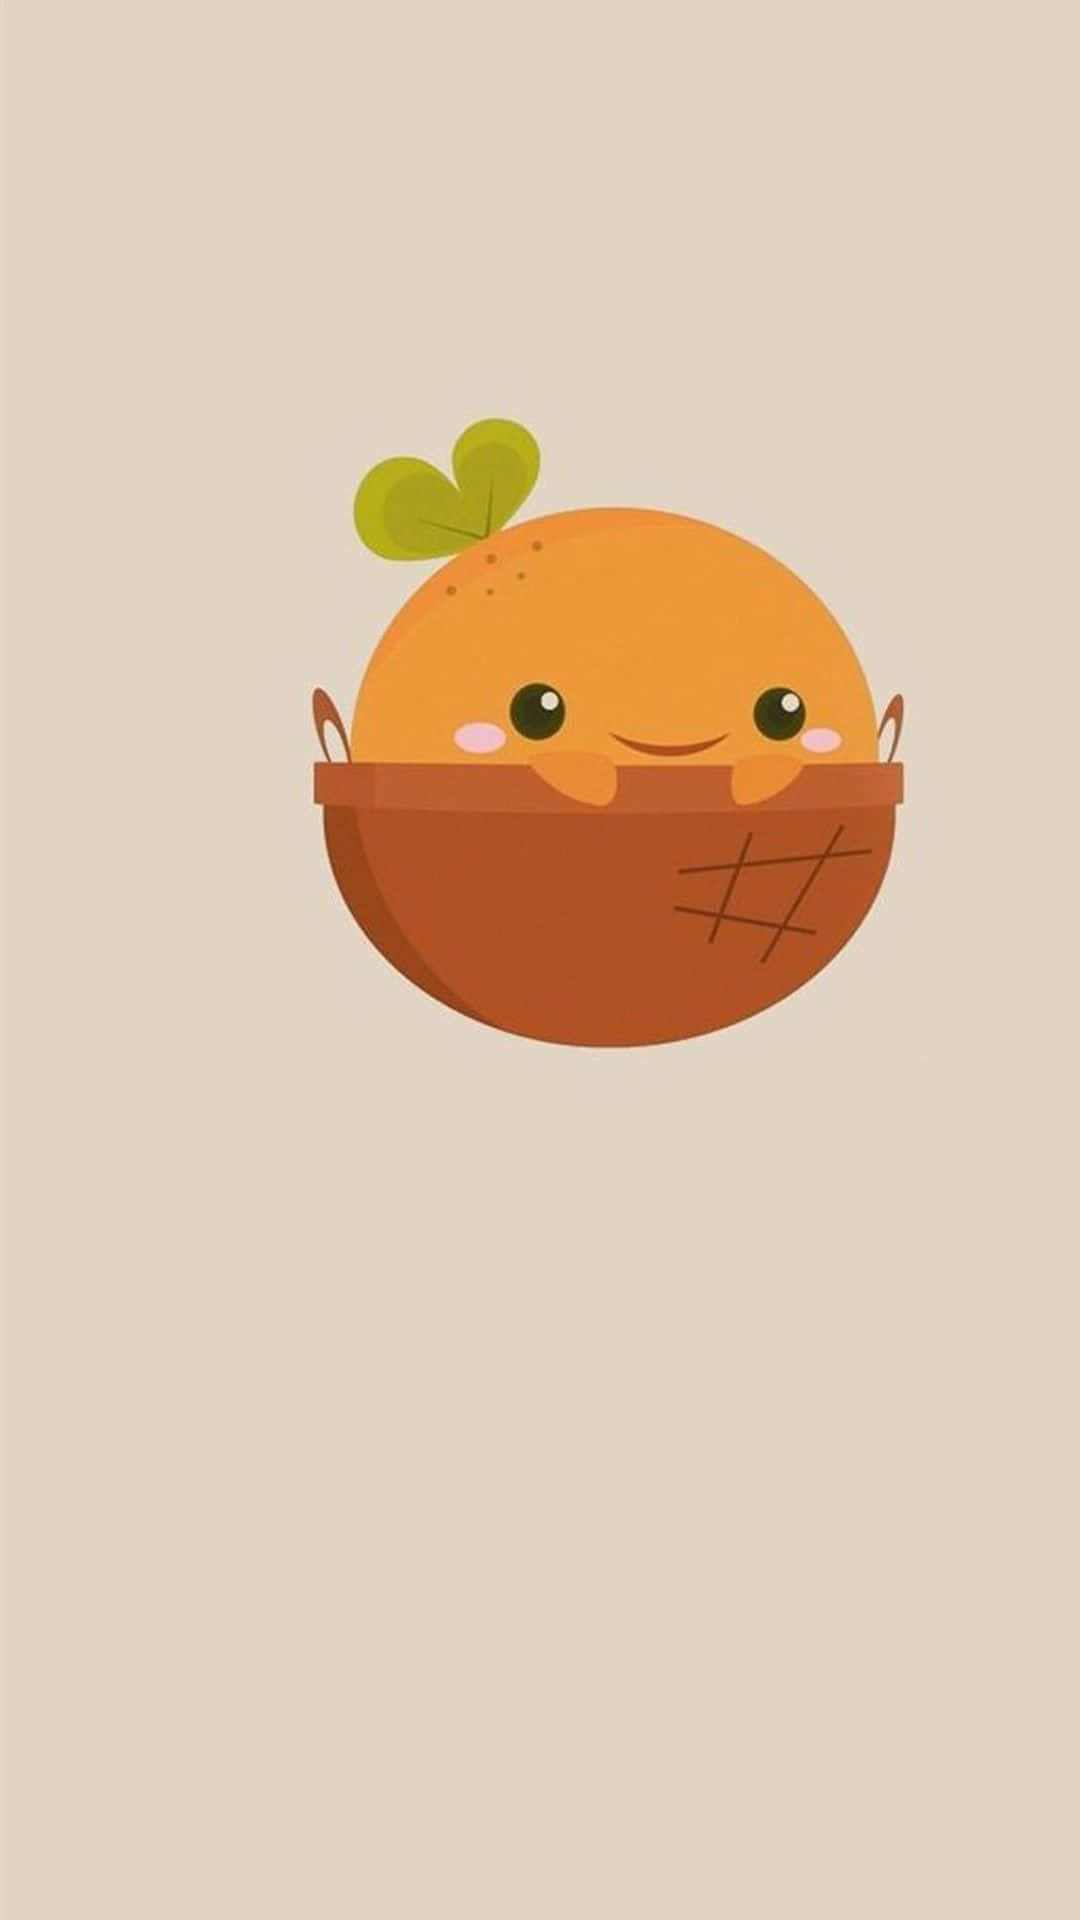 A Cute Orange Snack For The Perfect Mid-day Pick-me-up